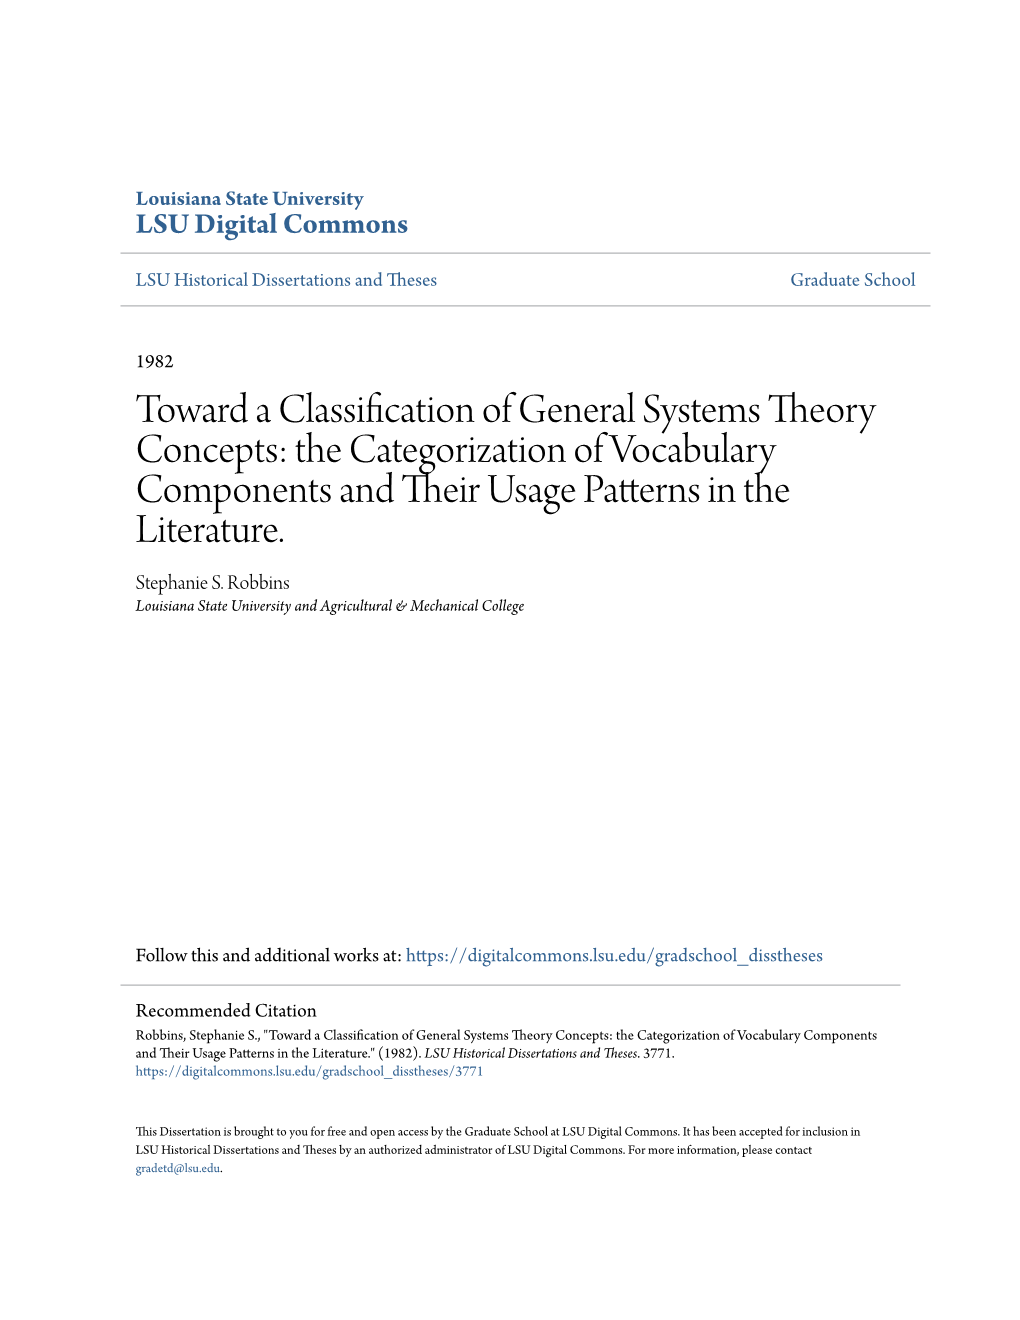 Toward a Classification of General Systems Theory Concepts: the Categorization of Vocabulary Components and Their Su Age Patterns in the Literature